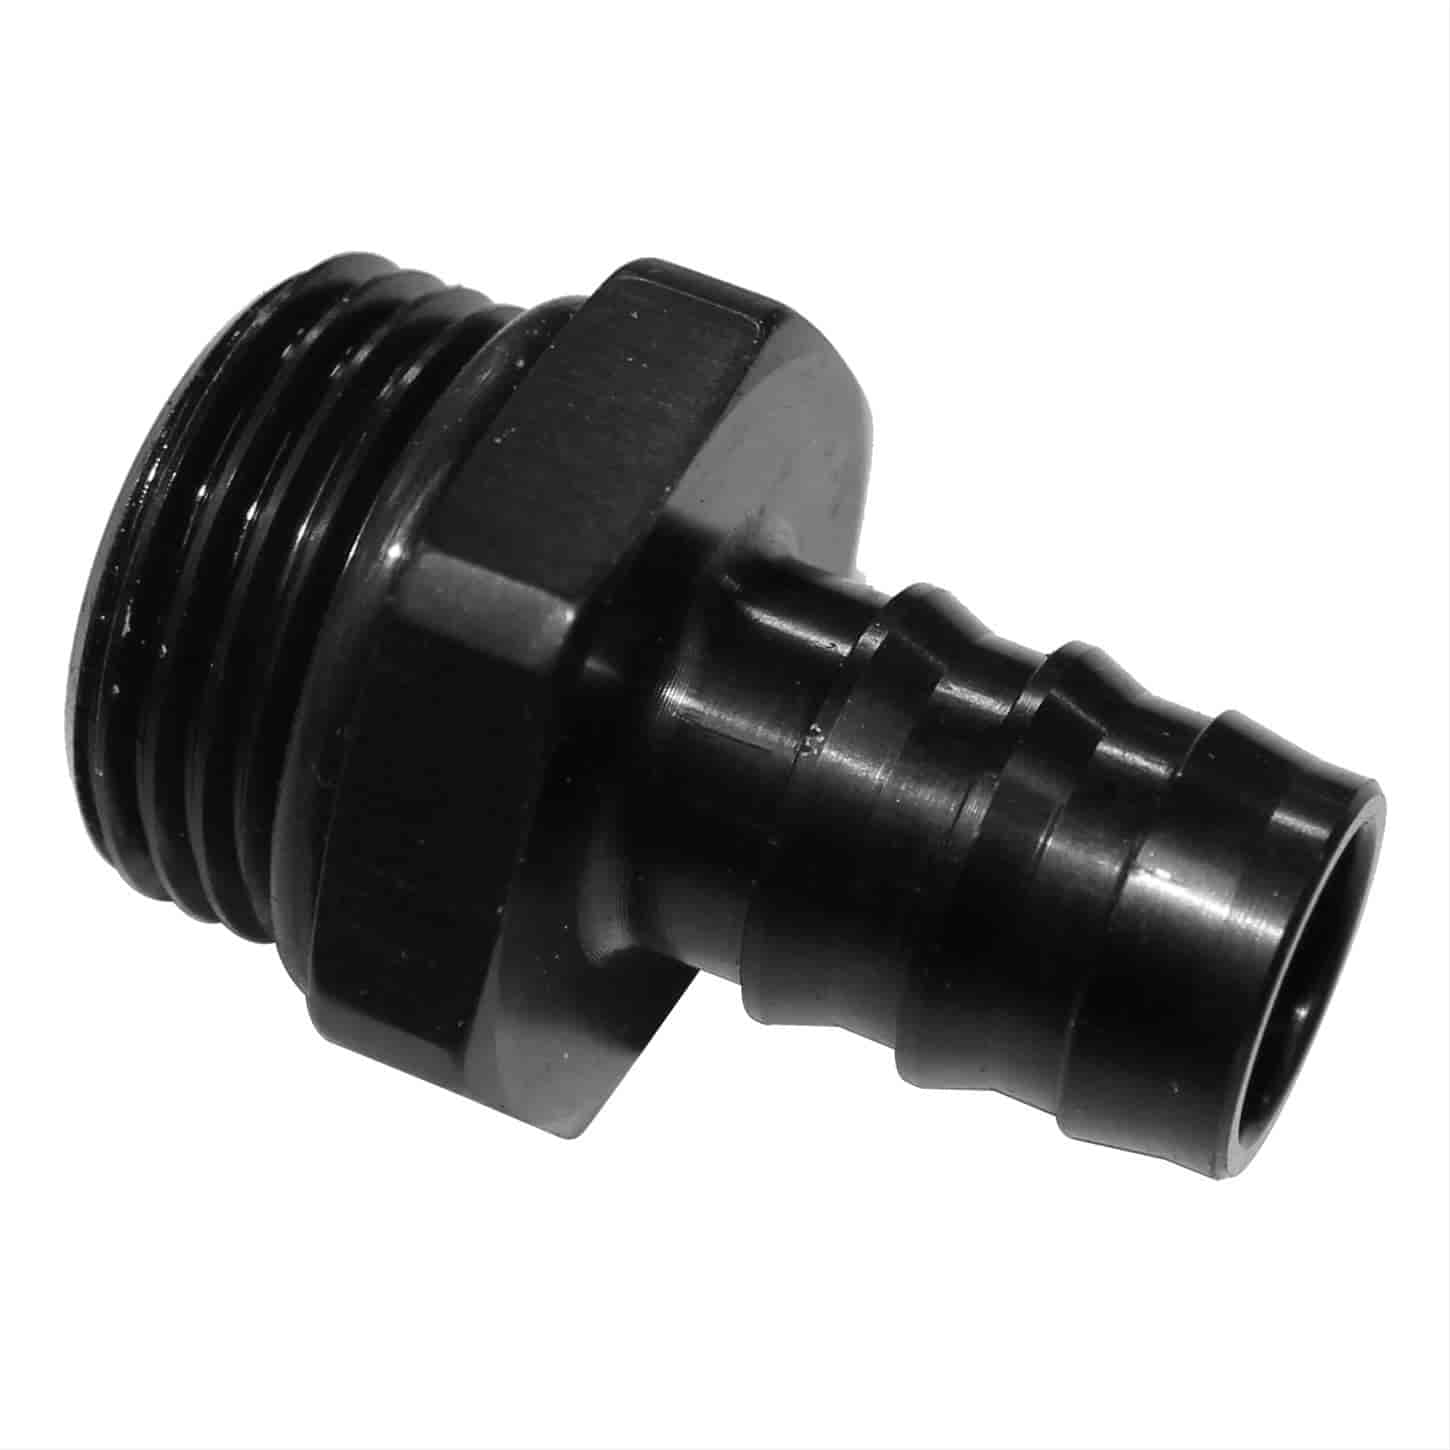 -12AN O-Ring Port Fitting 5/8" Barbed Hose Fitting